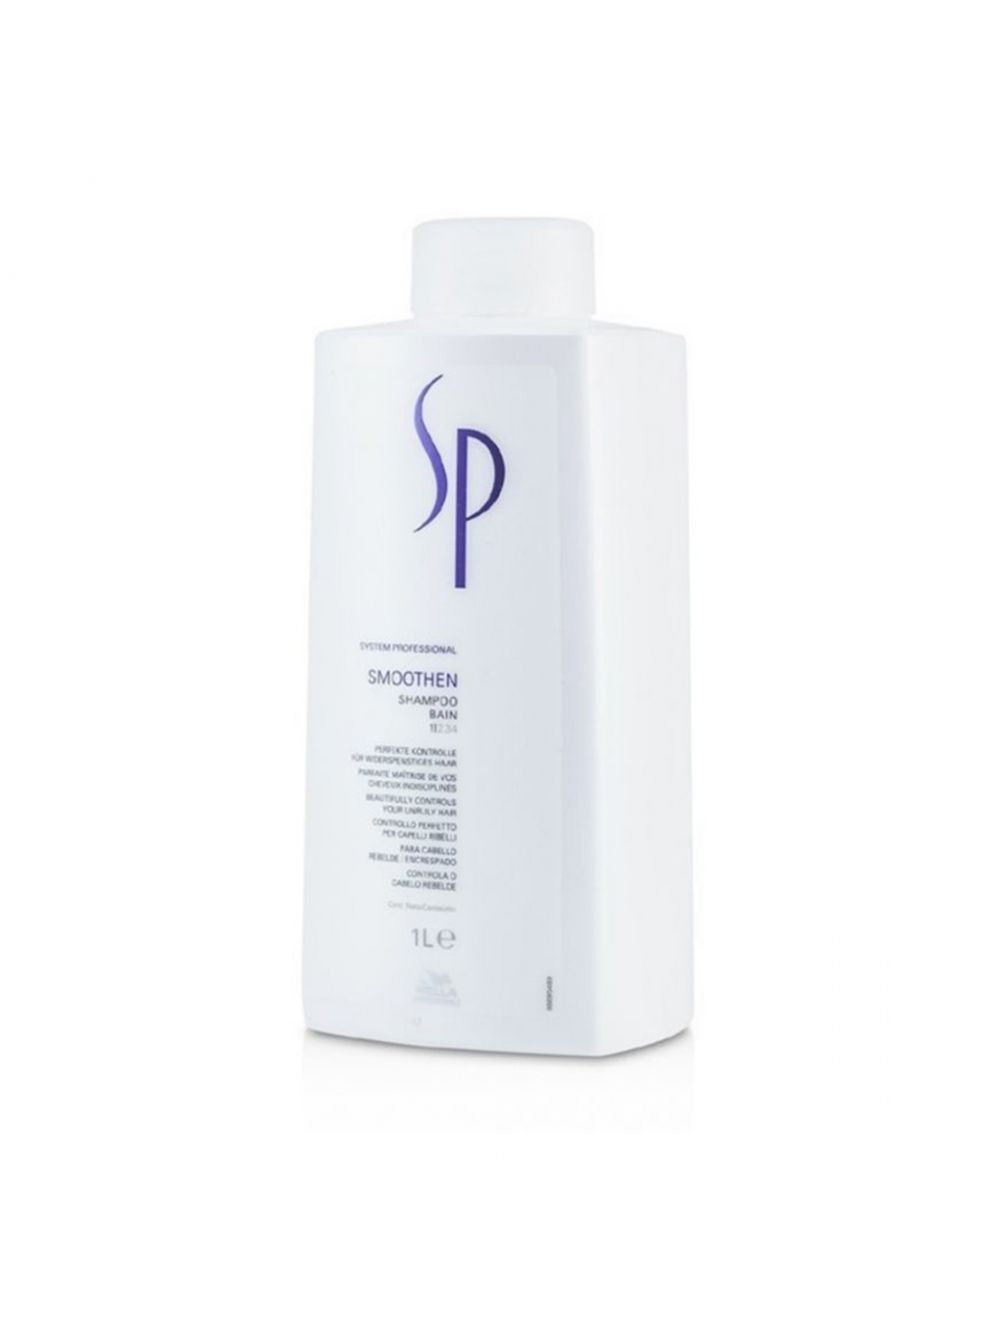 SP System Professional Smoothen Shampoo (1000ml)